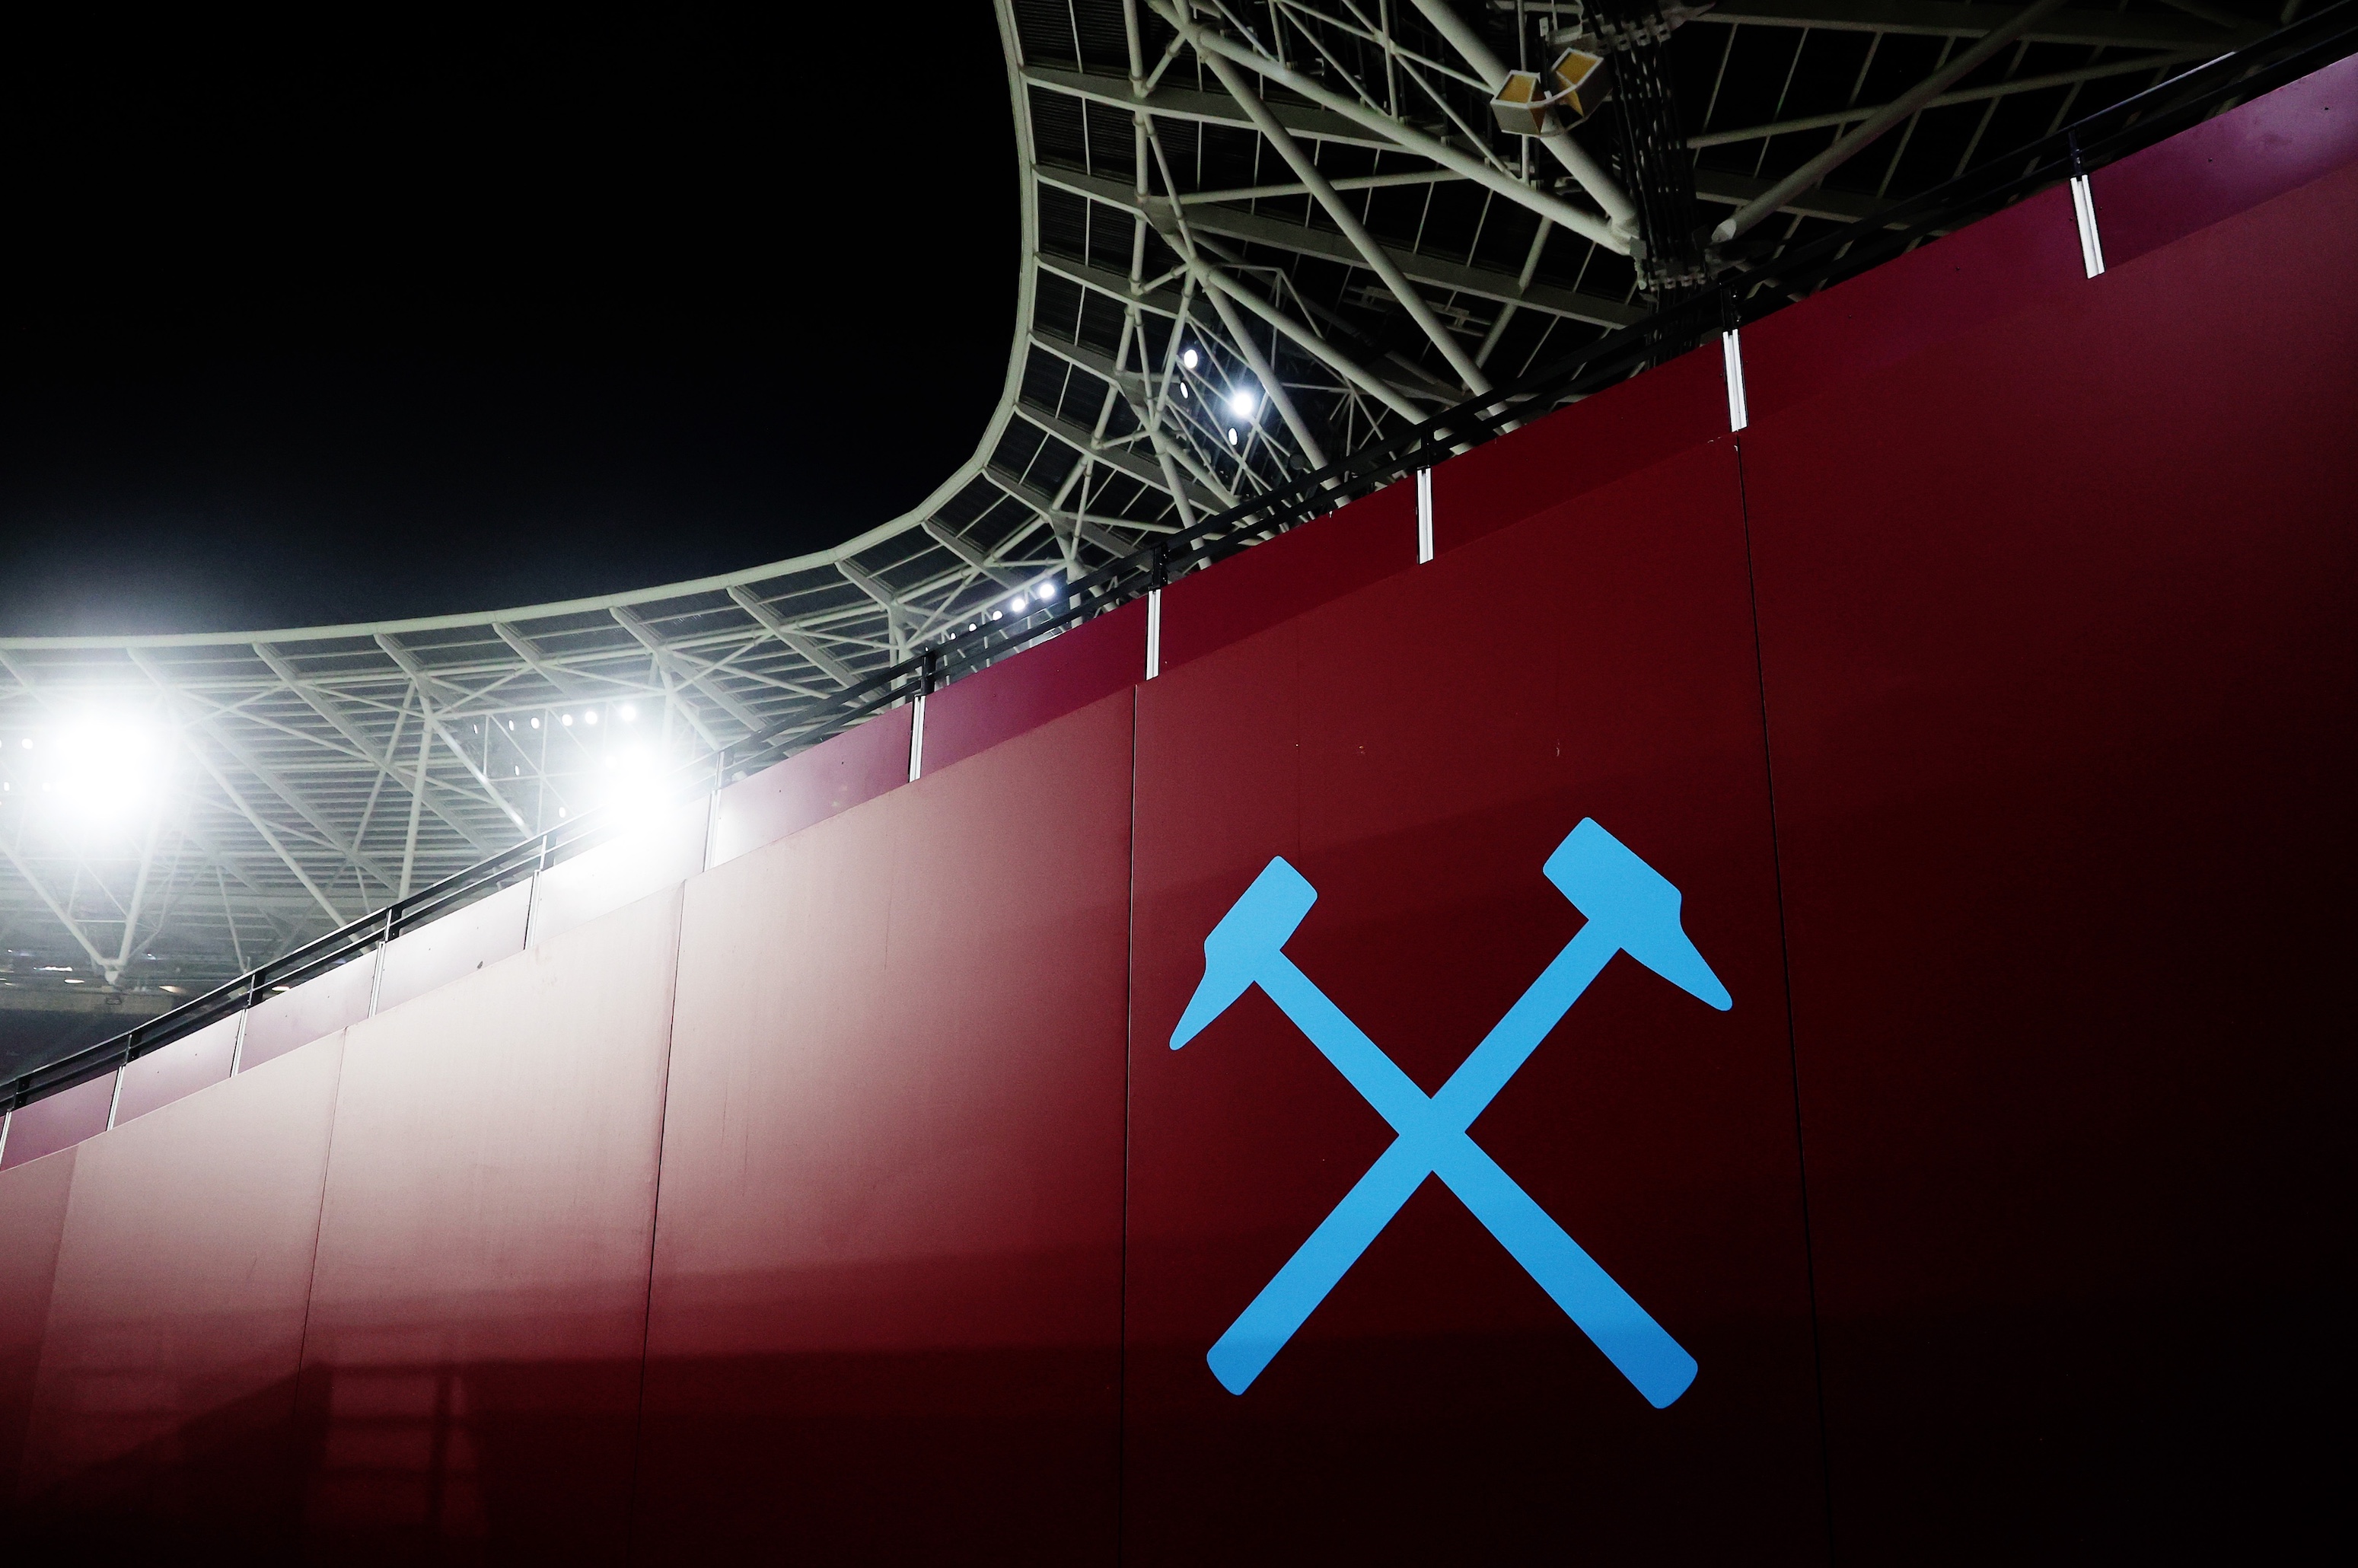 West Ham could be set for £65 million windfall ahead of summer transfer window CaughtOffside